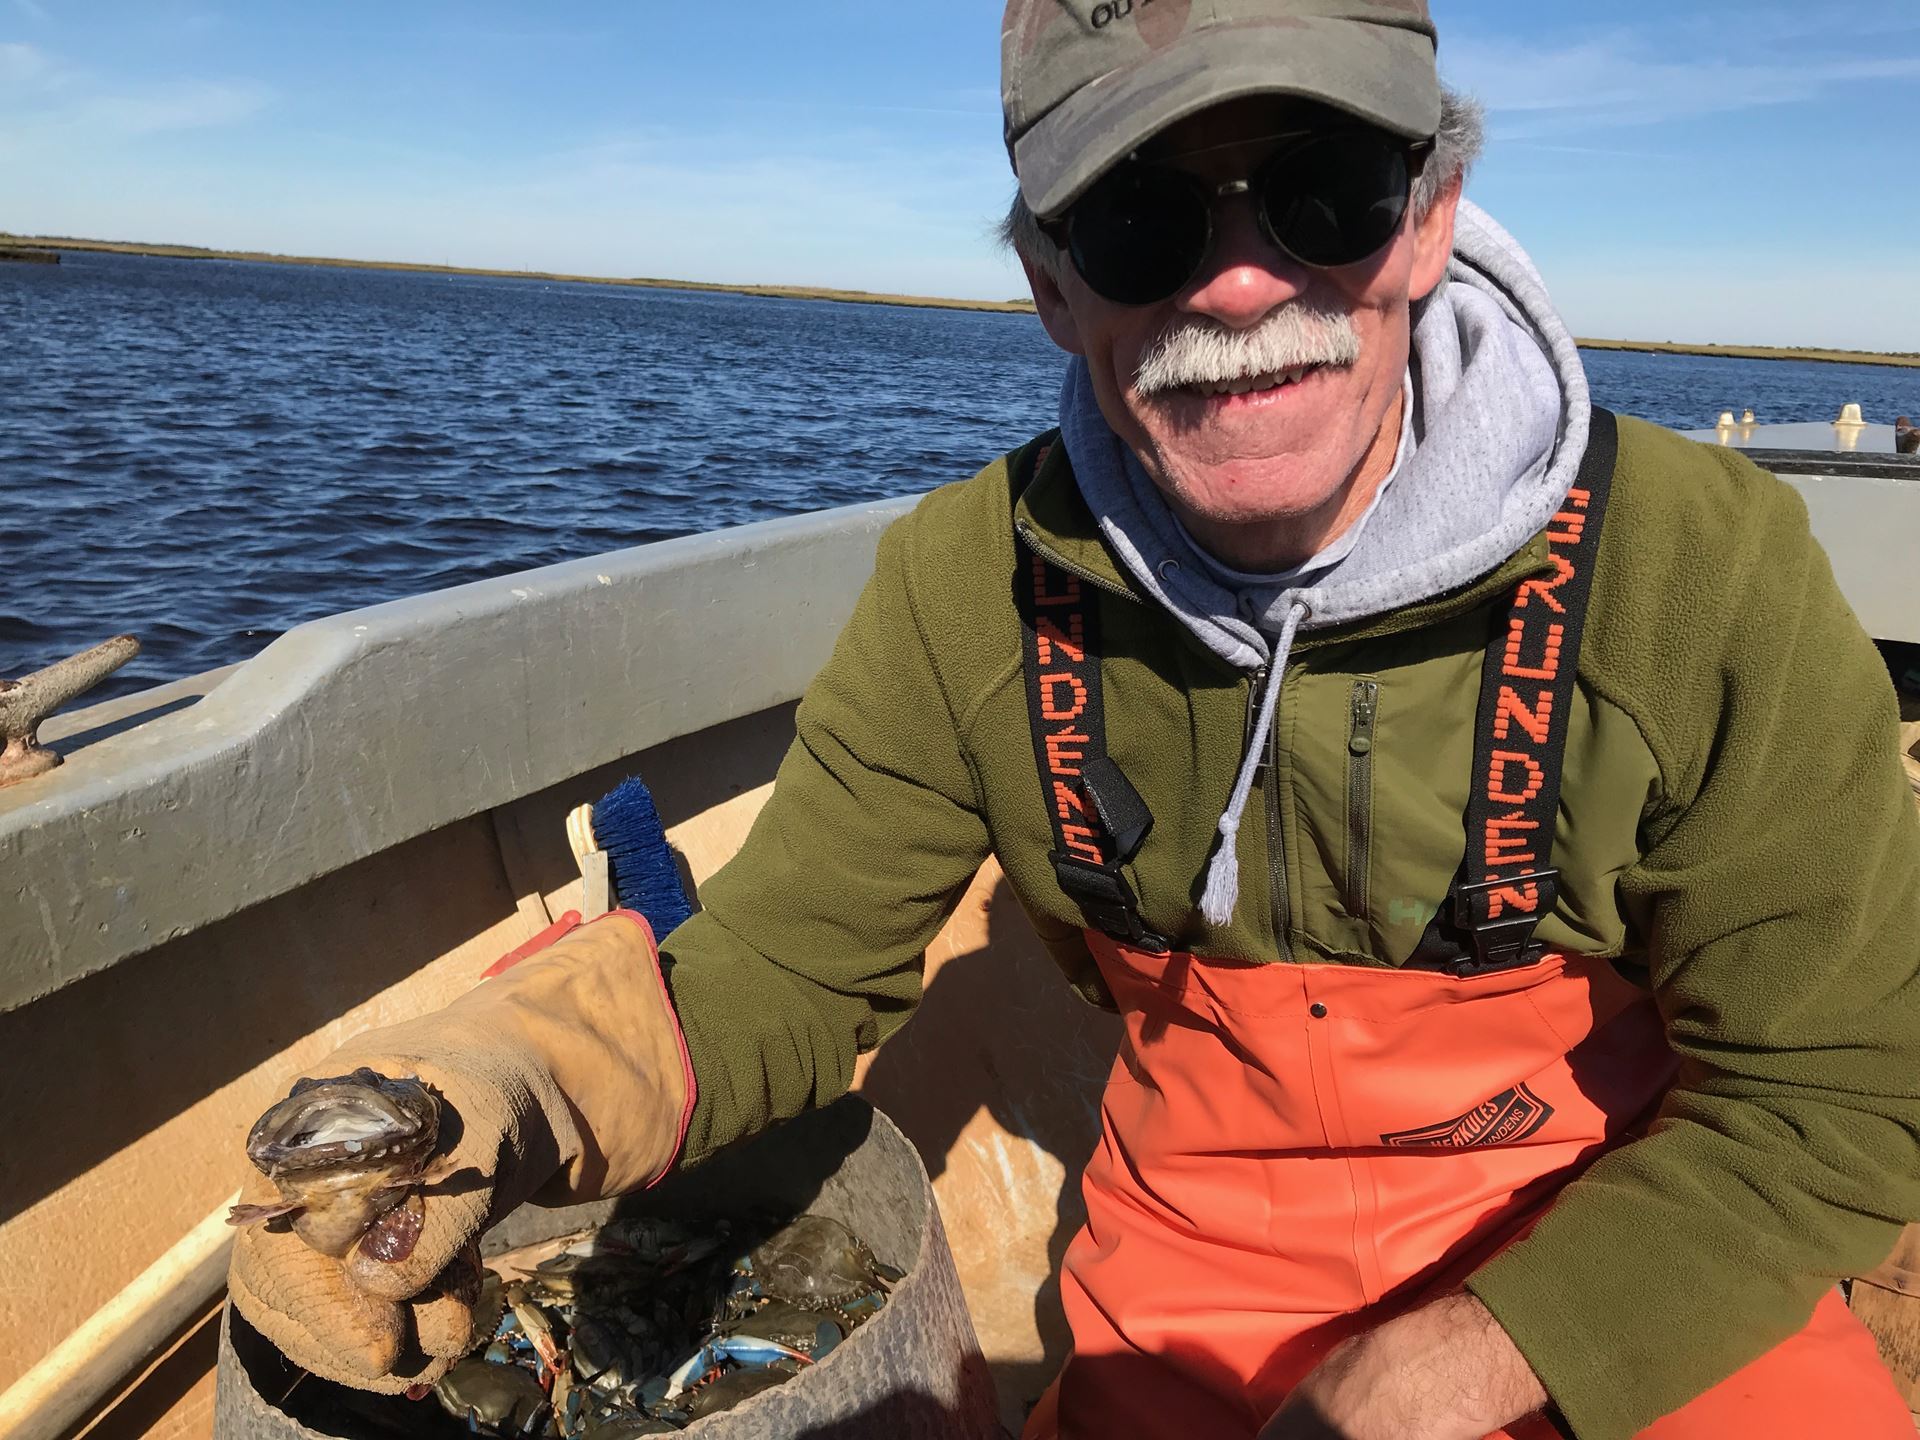 Michael Chiarappa-holding an oyster cracker fish while doing field work documenting the maritime cultural landscape. Photo courtesy of Michael Chiarappa.